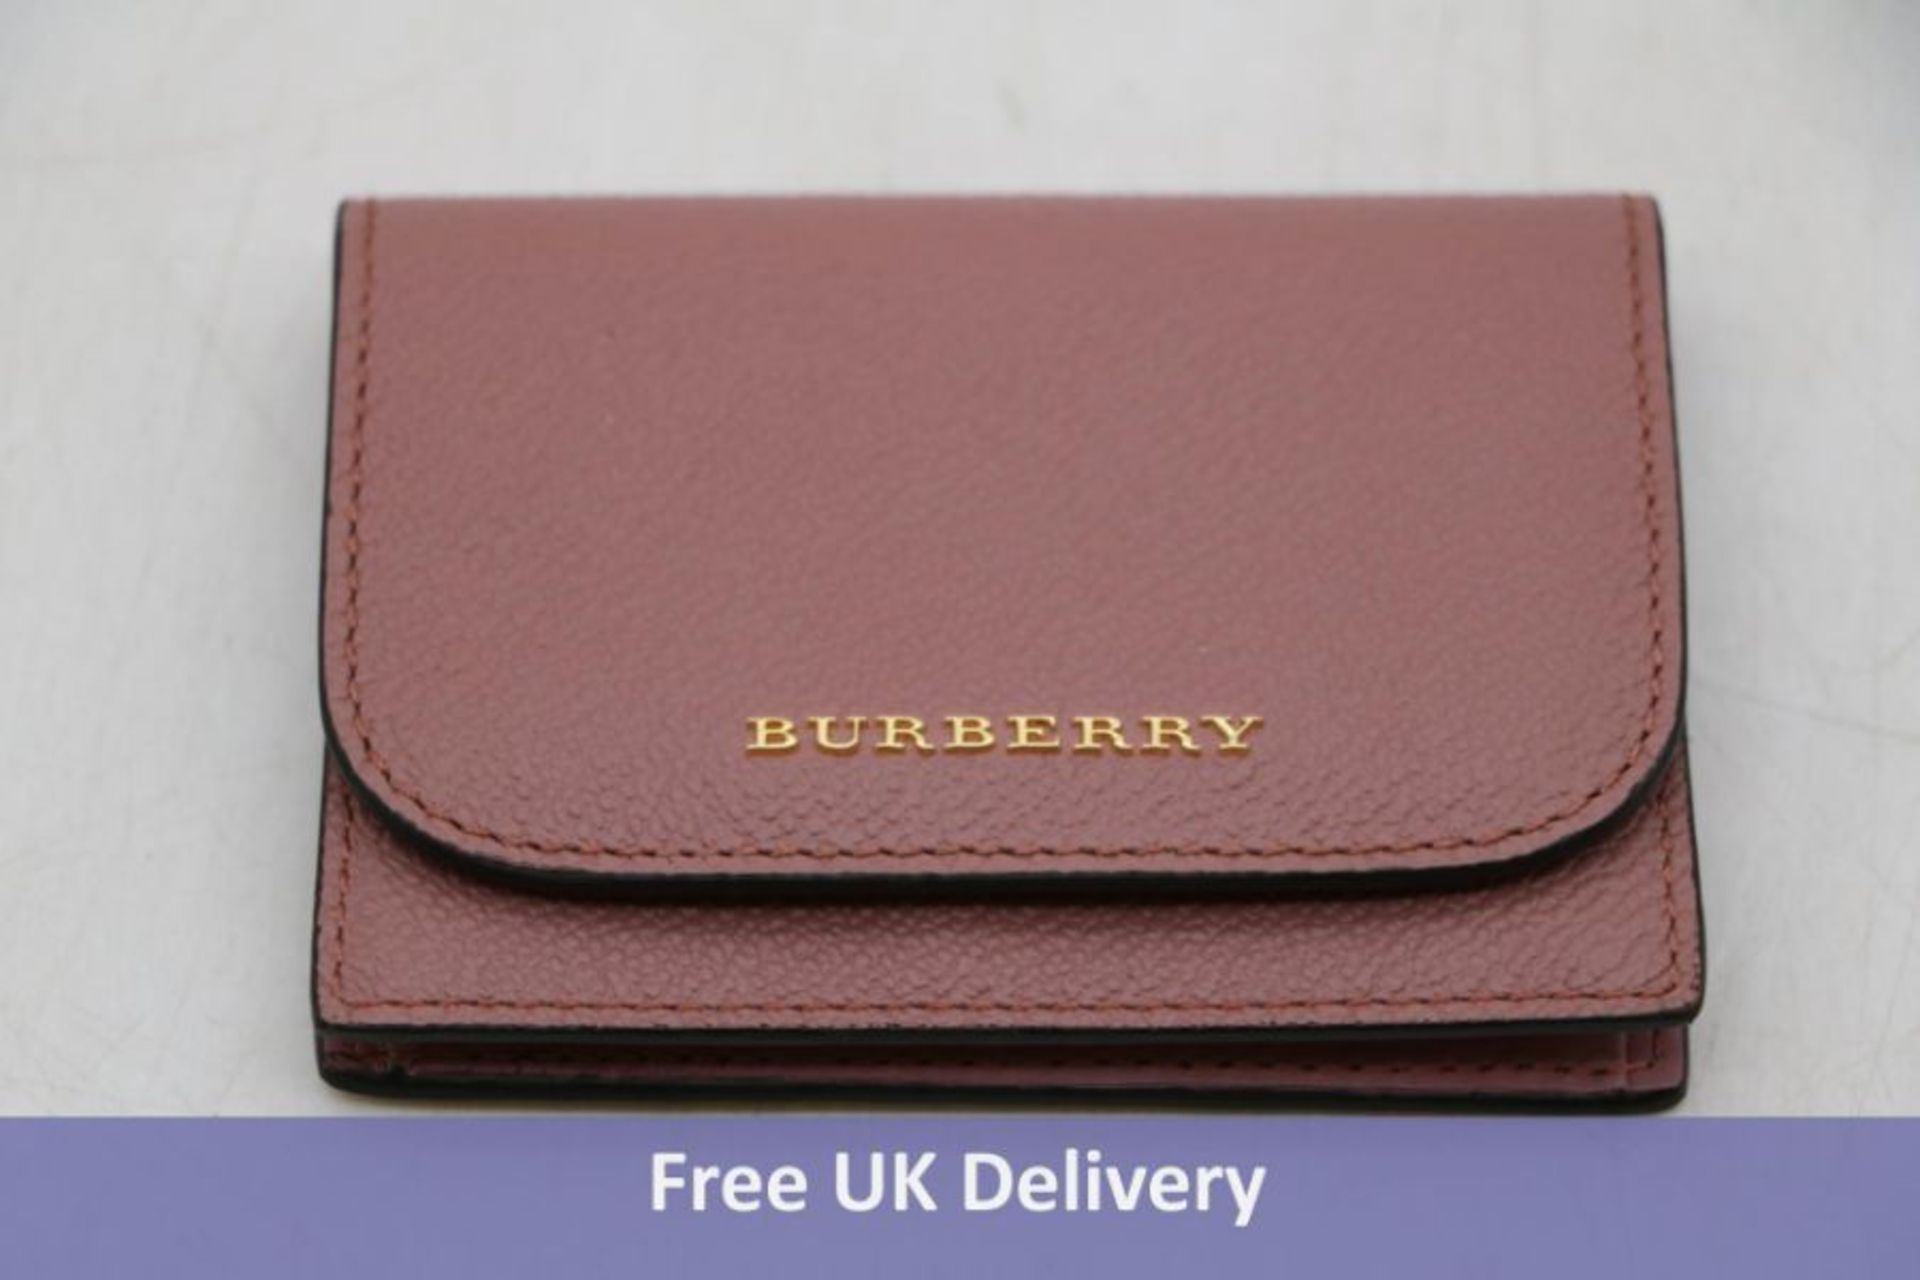 Burberry Grainy Leather Card Case Small Wallet, Duty Pink with Dust Bag, Some marks